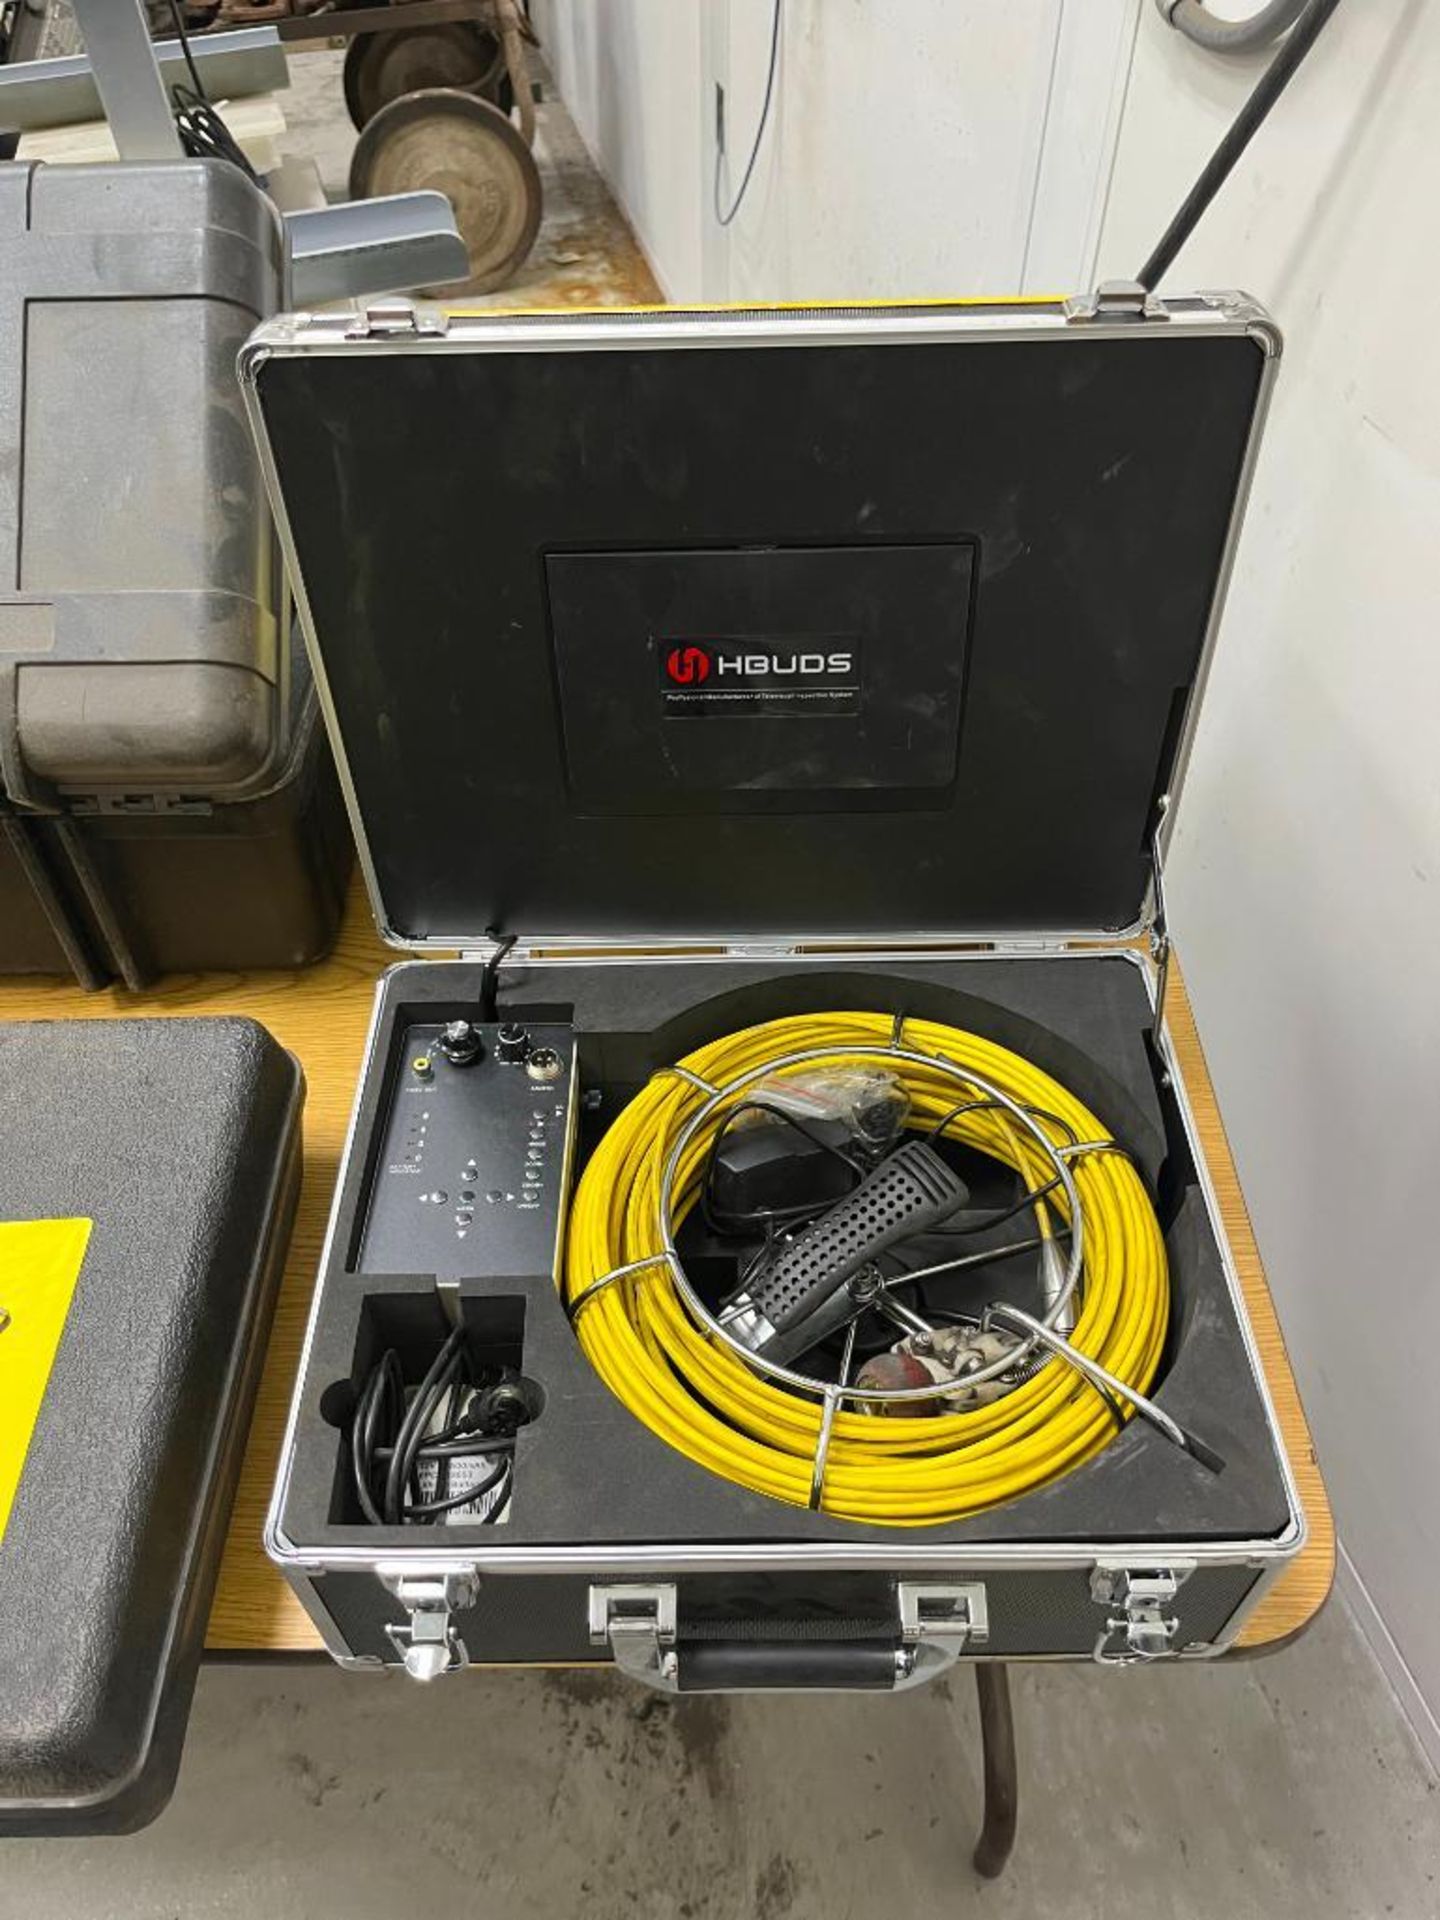 Hbuds Televisual Inspection System